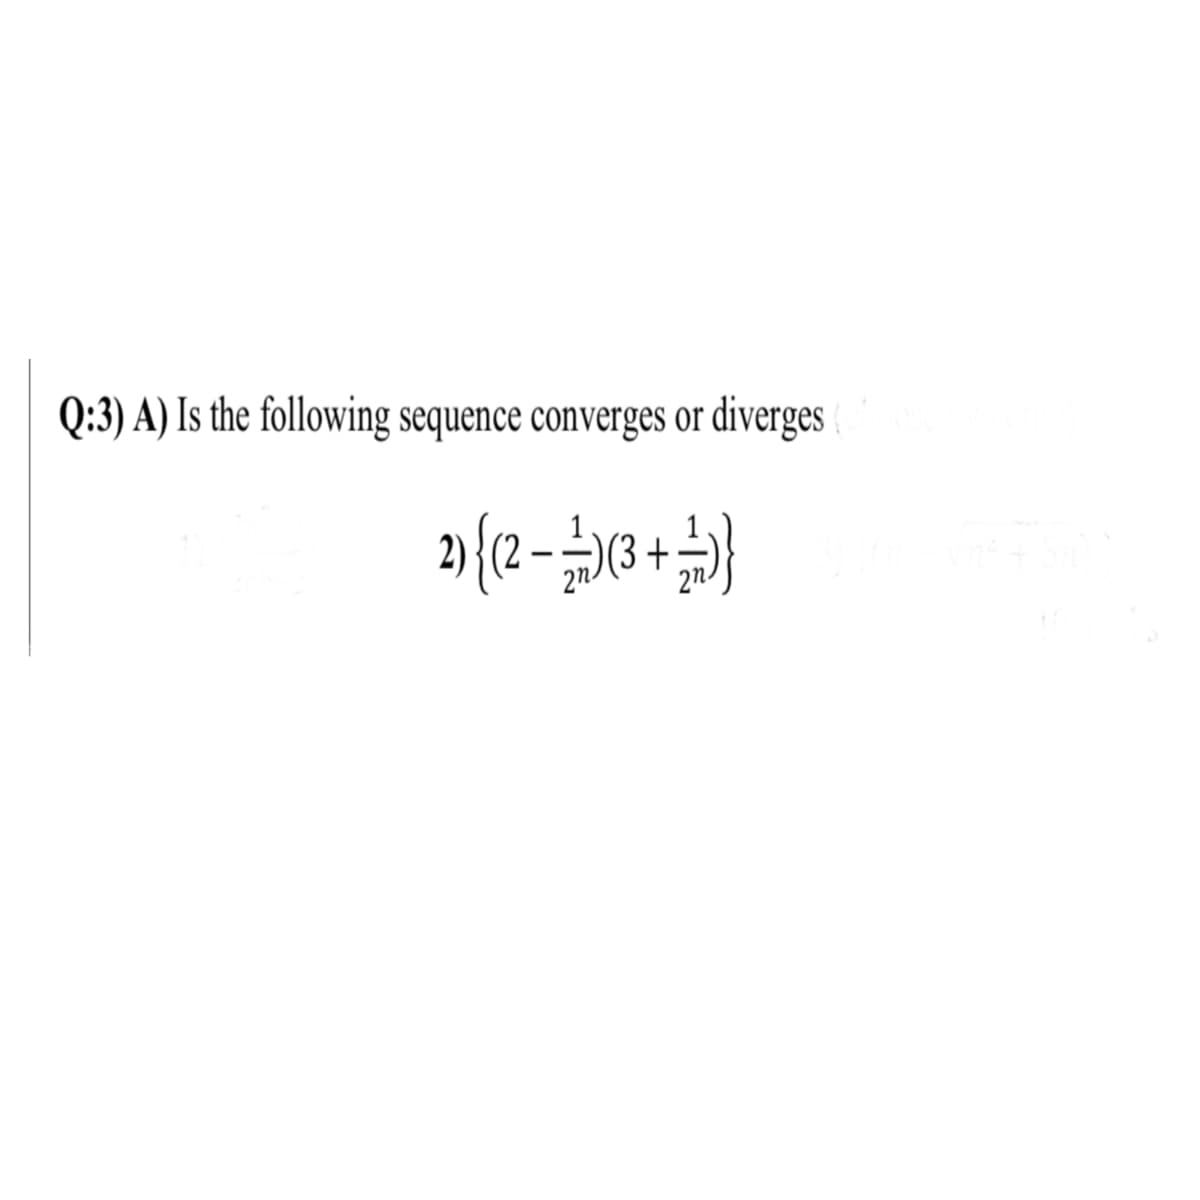 Q:3) A) Is the following sequence converges or diverges
+
